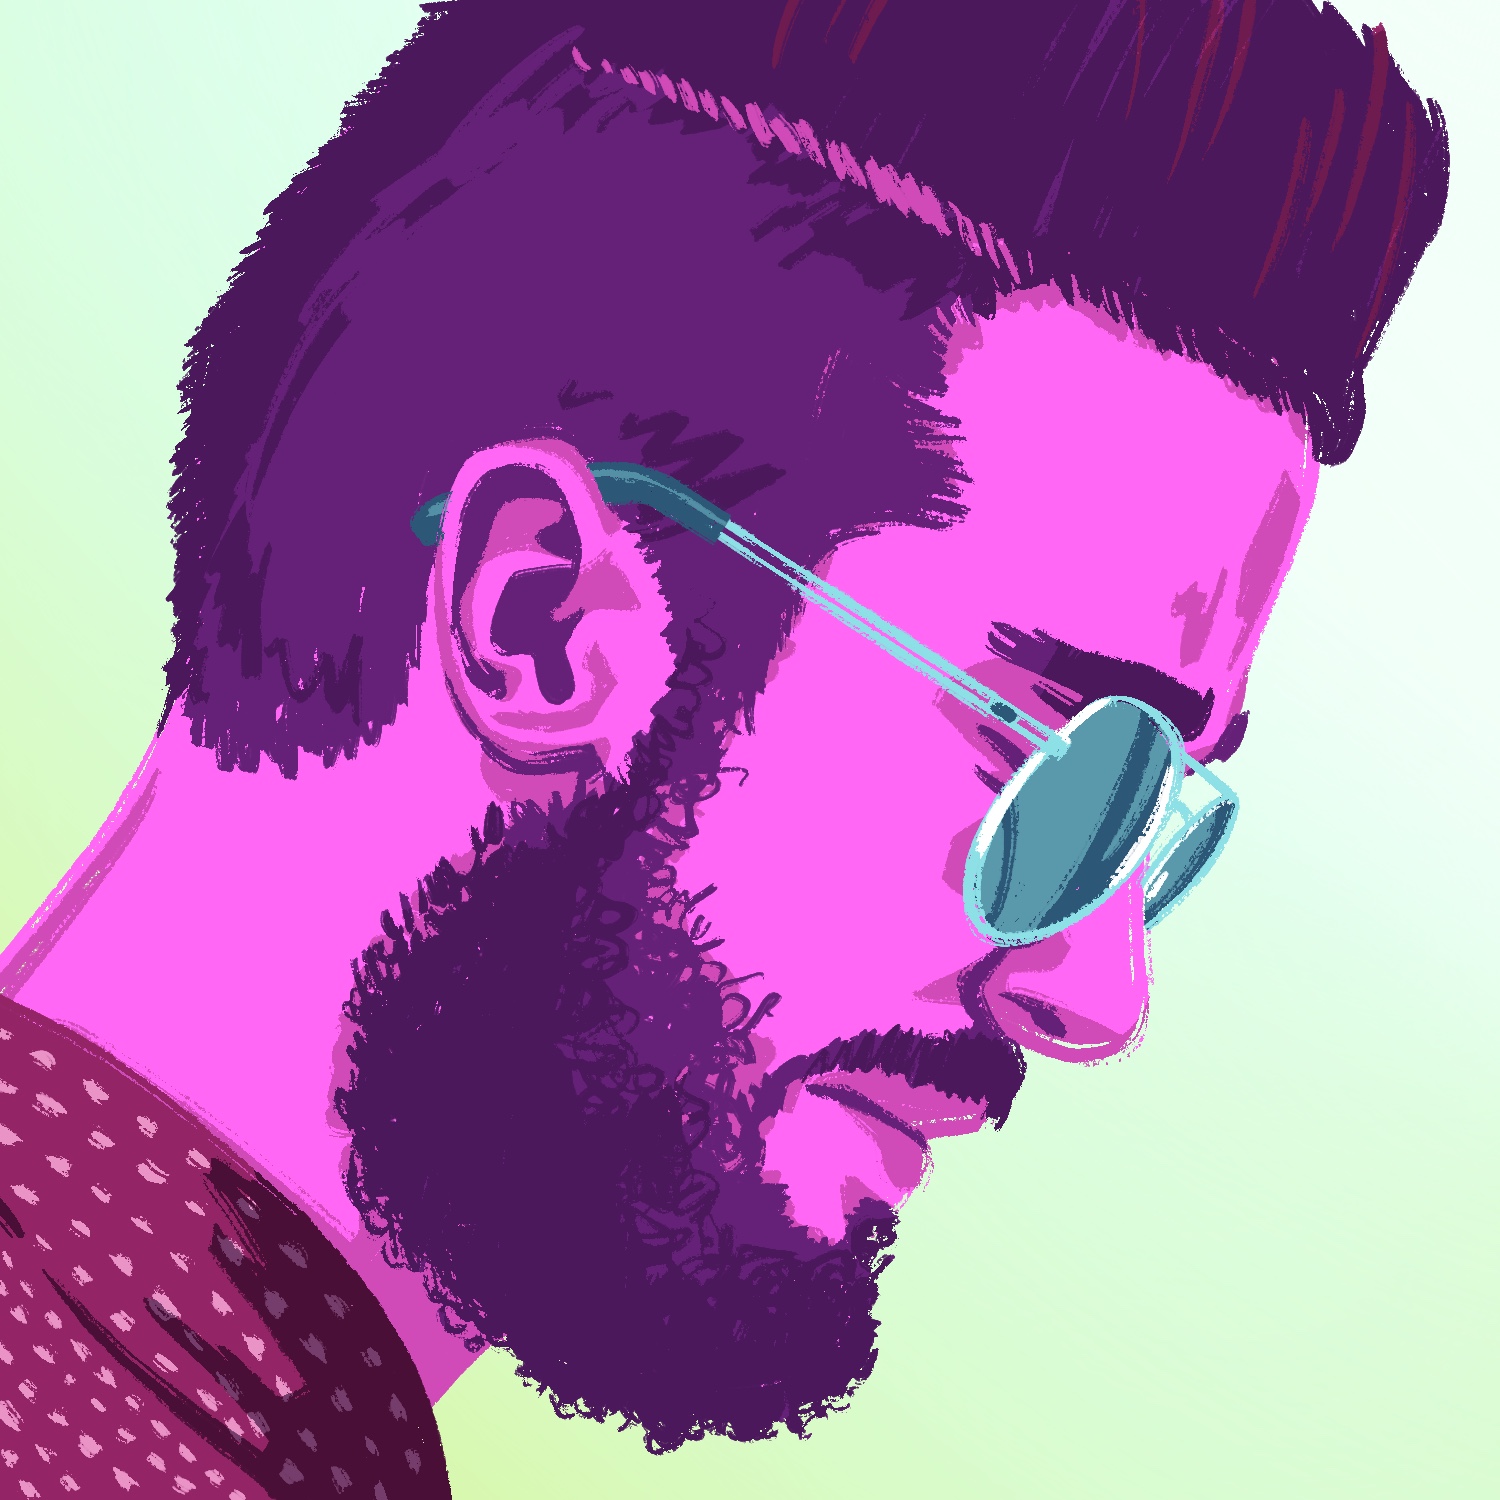 An illustration of a man in profile, wearing sunglasses, and looking down, presumably at a cell phone. The man has a mustache and beard, and thick dark hair that is styled high. He is squinting slightly, and has a solemn look, but his expression is mostly unreadable. He is wearing a spotted shirt. The image was rendered in unrealistic colors, with the man in pink and purple and the background a very light green-blue.